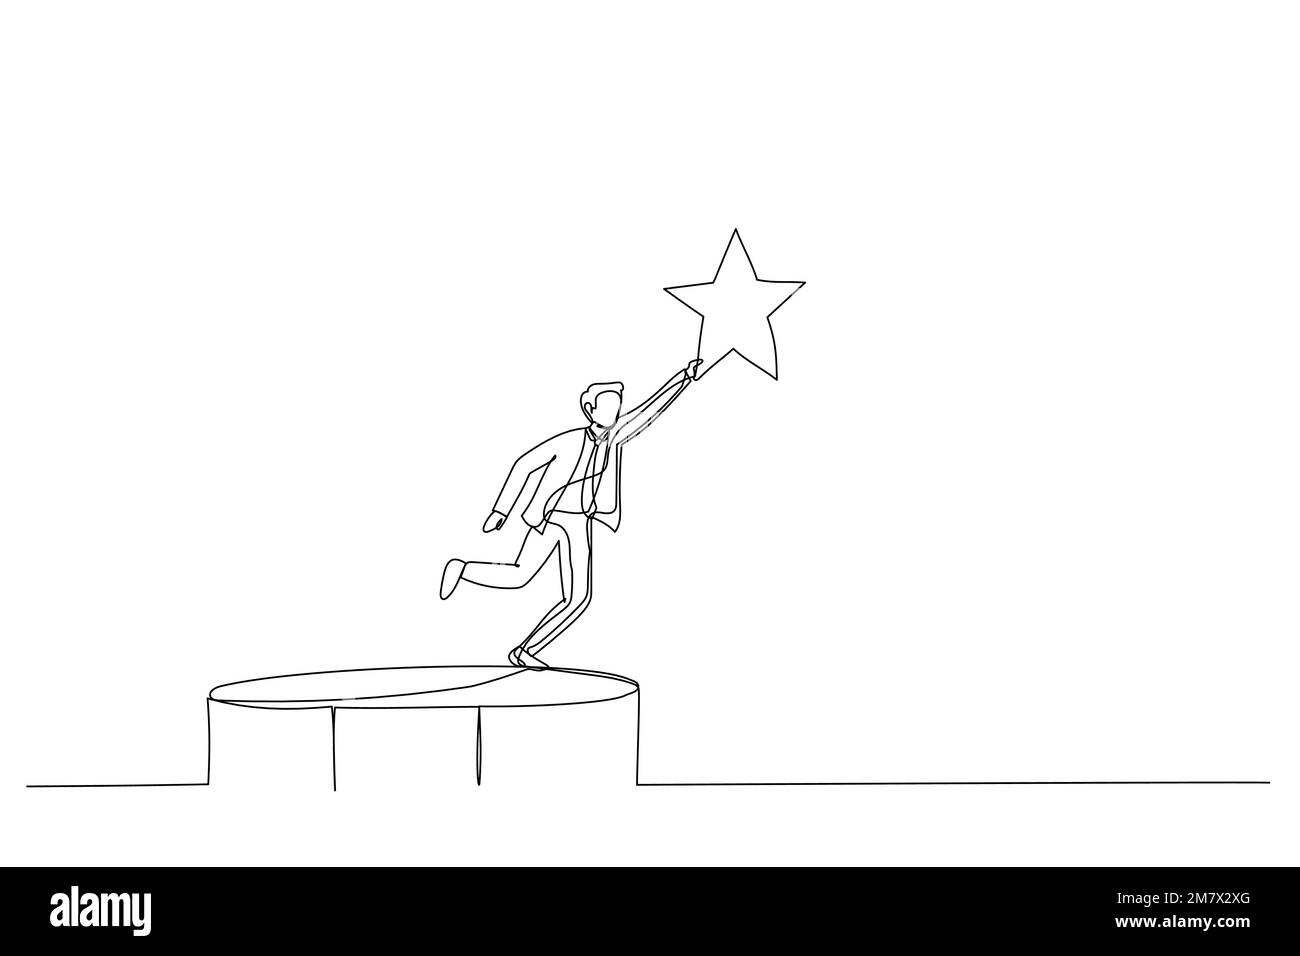 Drawing of businessman bounce on trampoline jump flying high to grab star. Metaphor for achievement. Continuous line art style Stock Vector